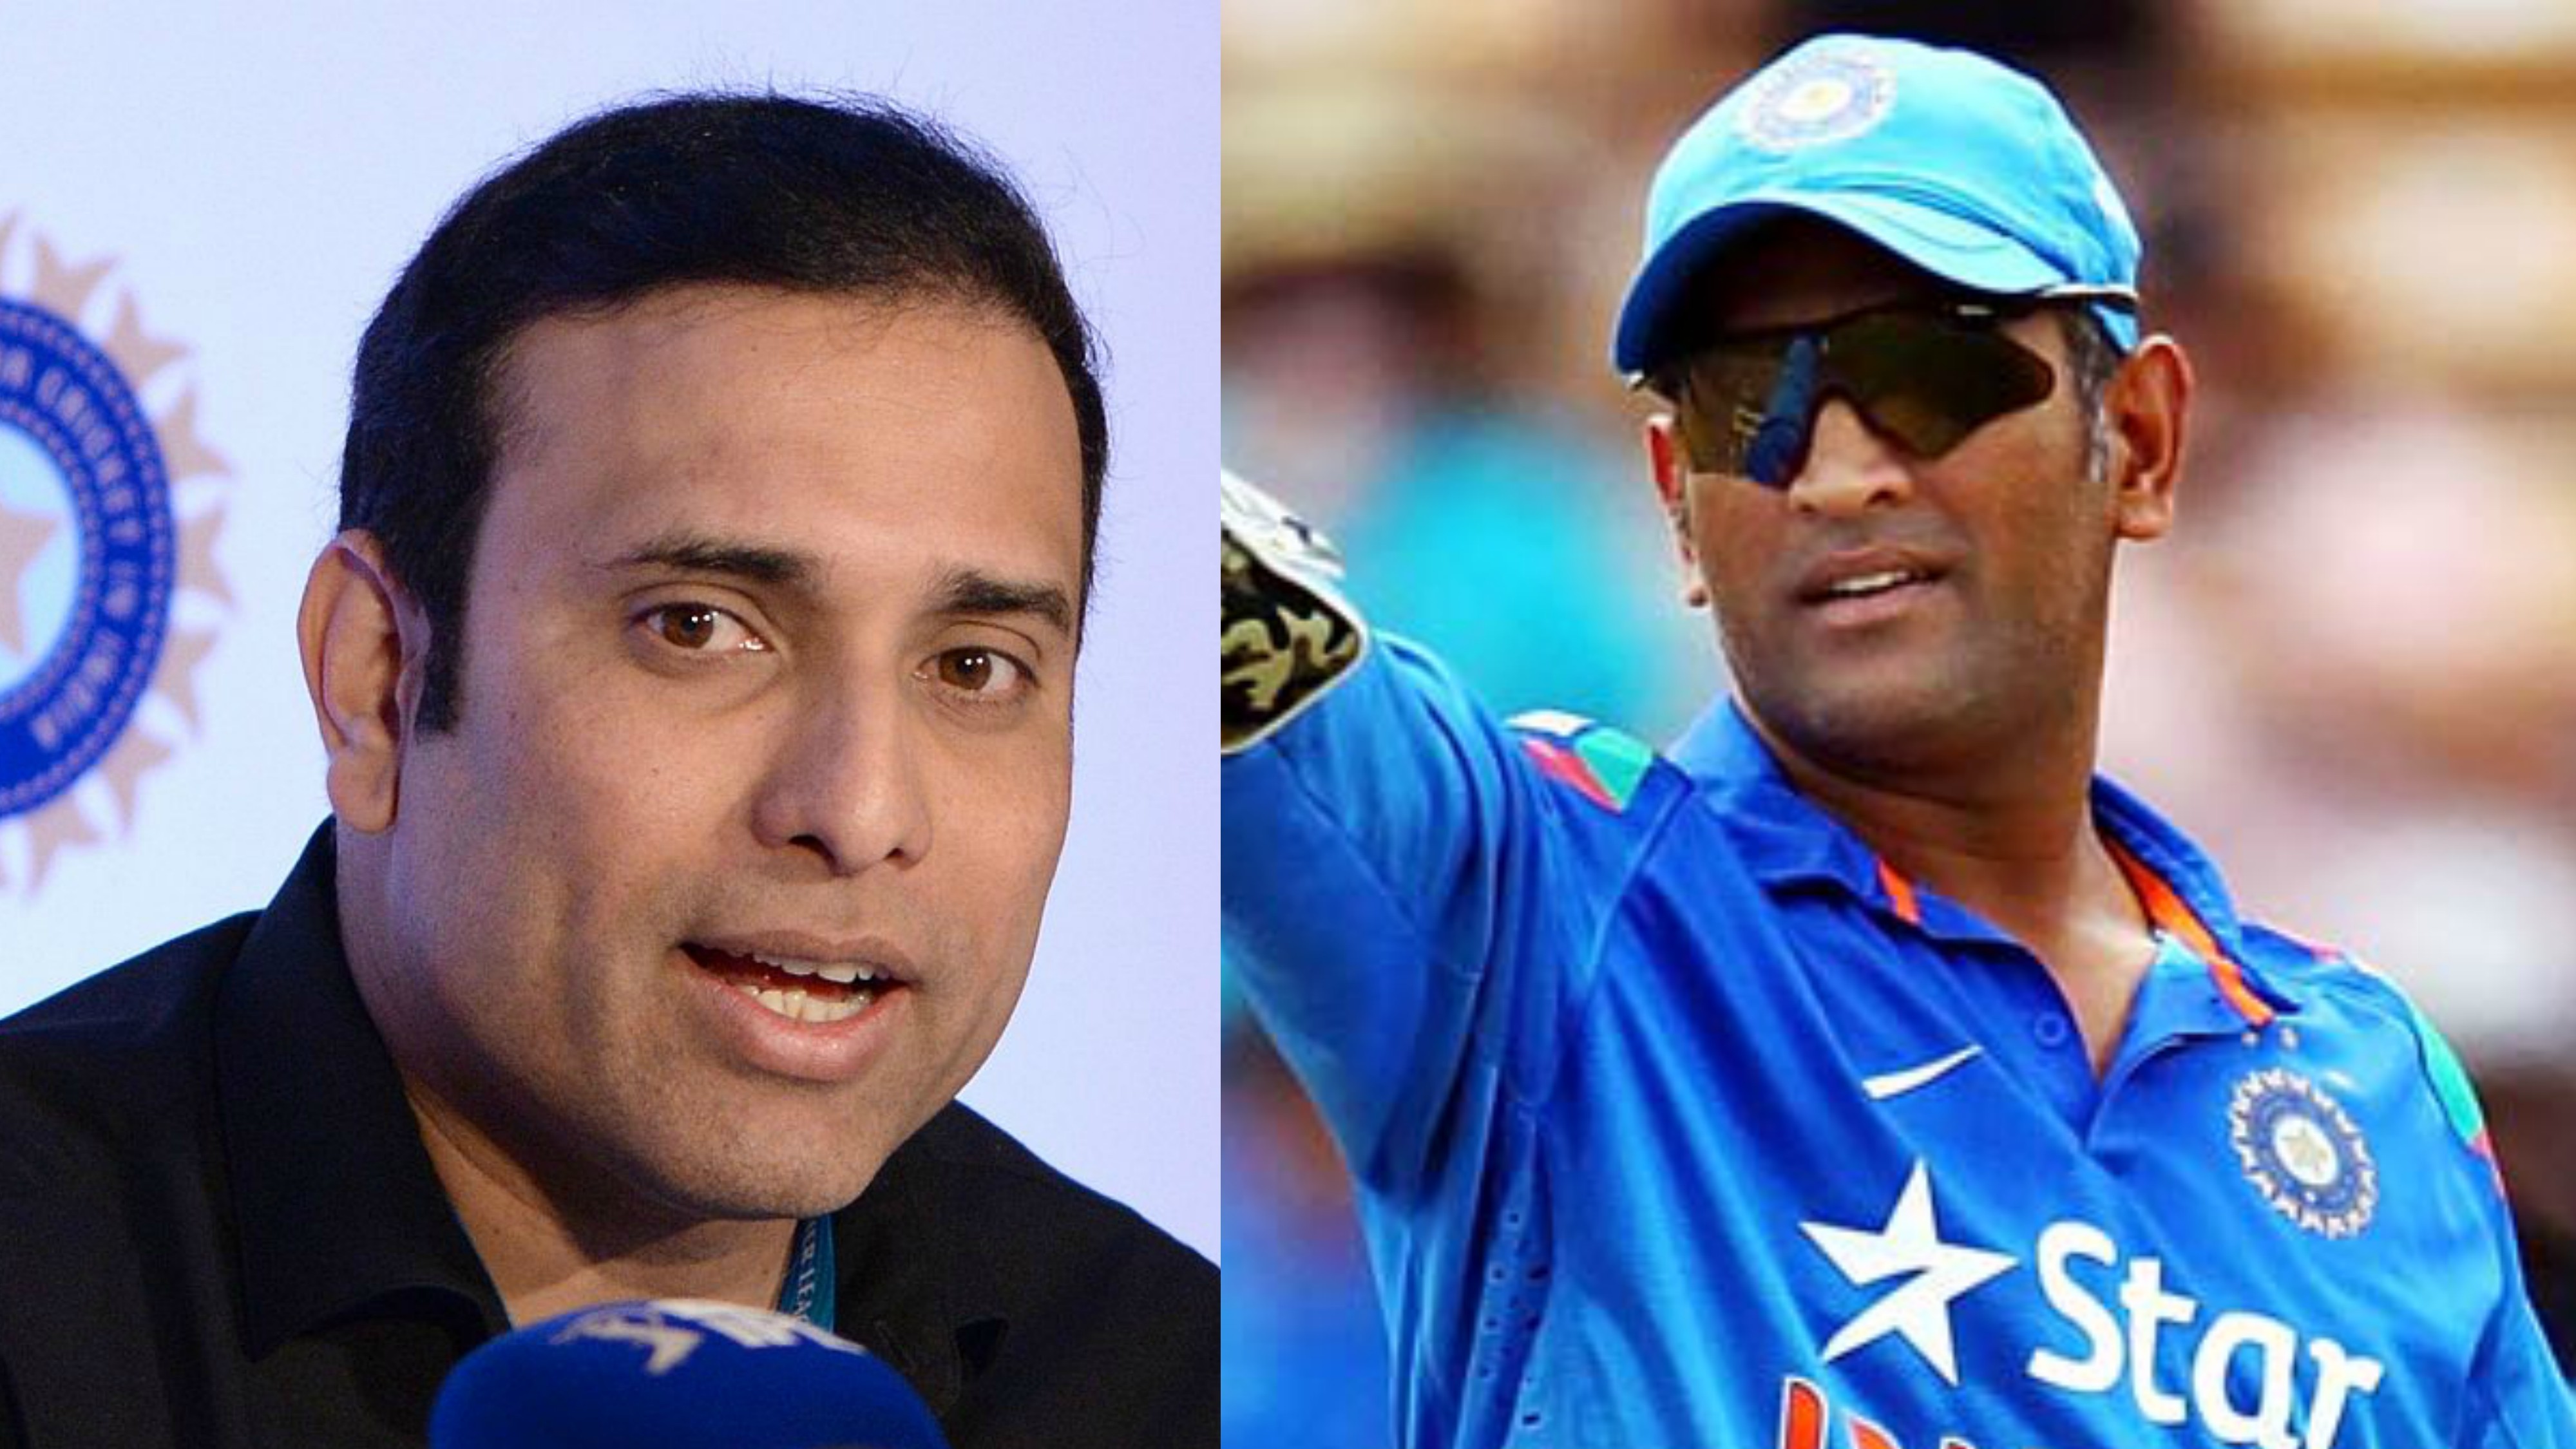 MS Dhoni has always been emotionally detached from results, says VVS Laxman